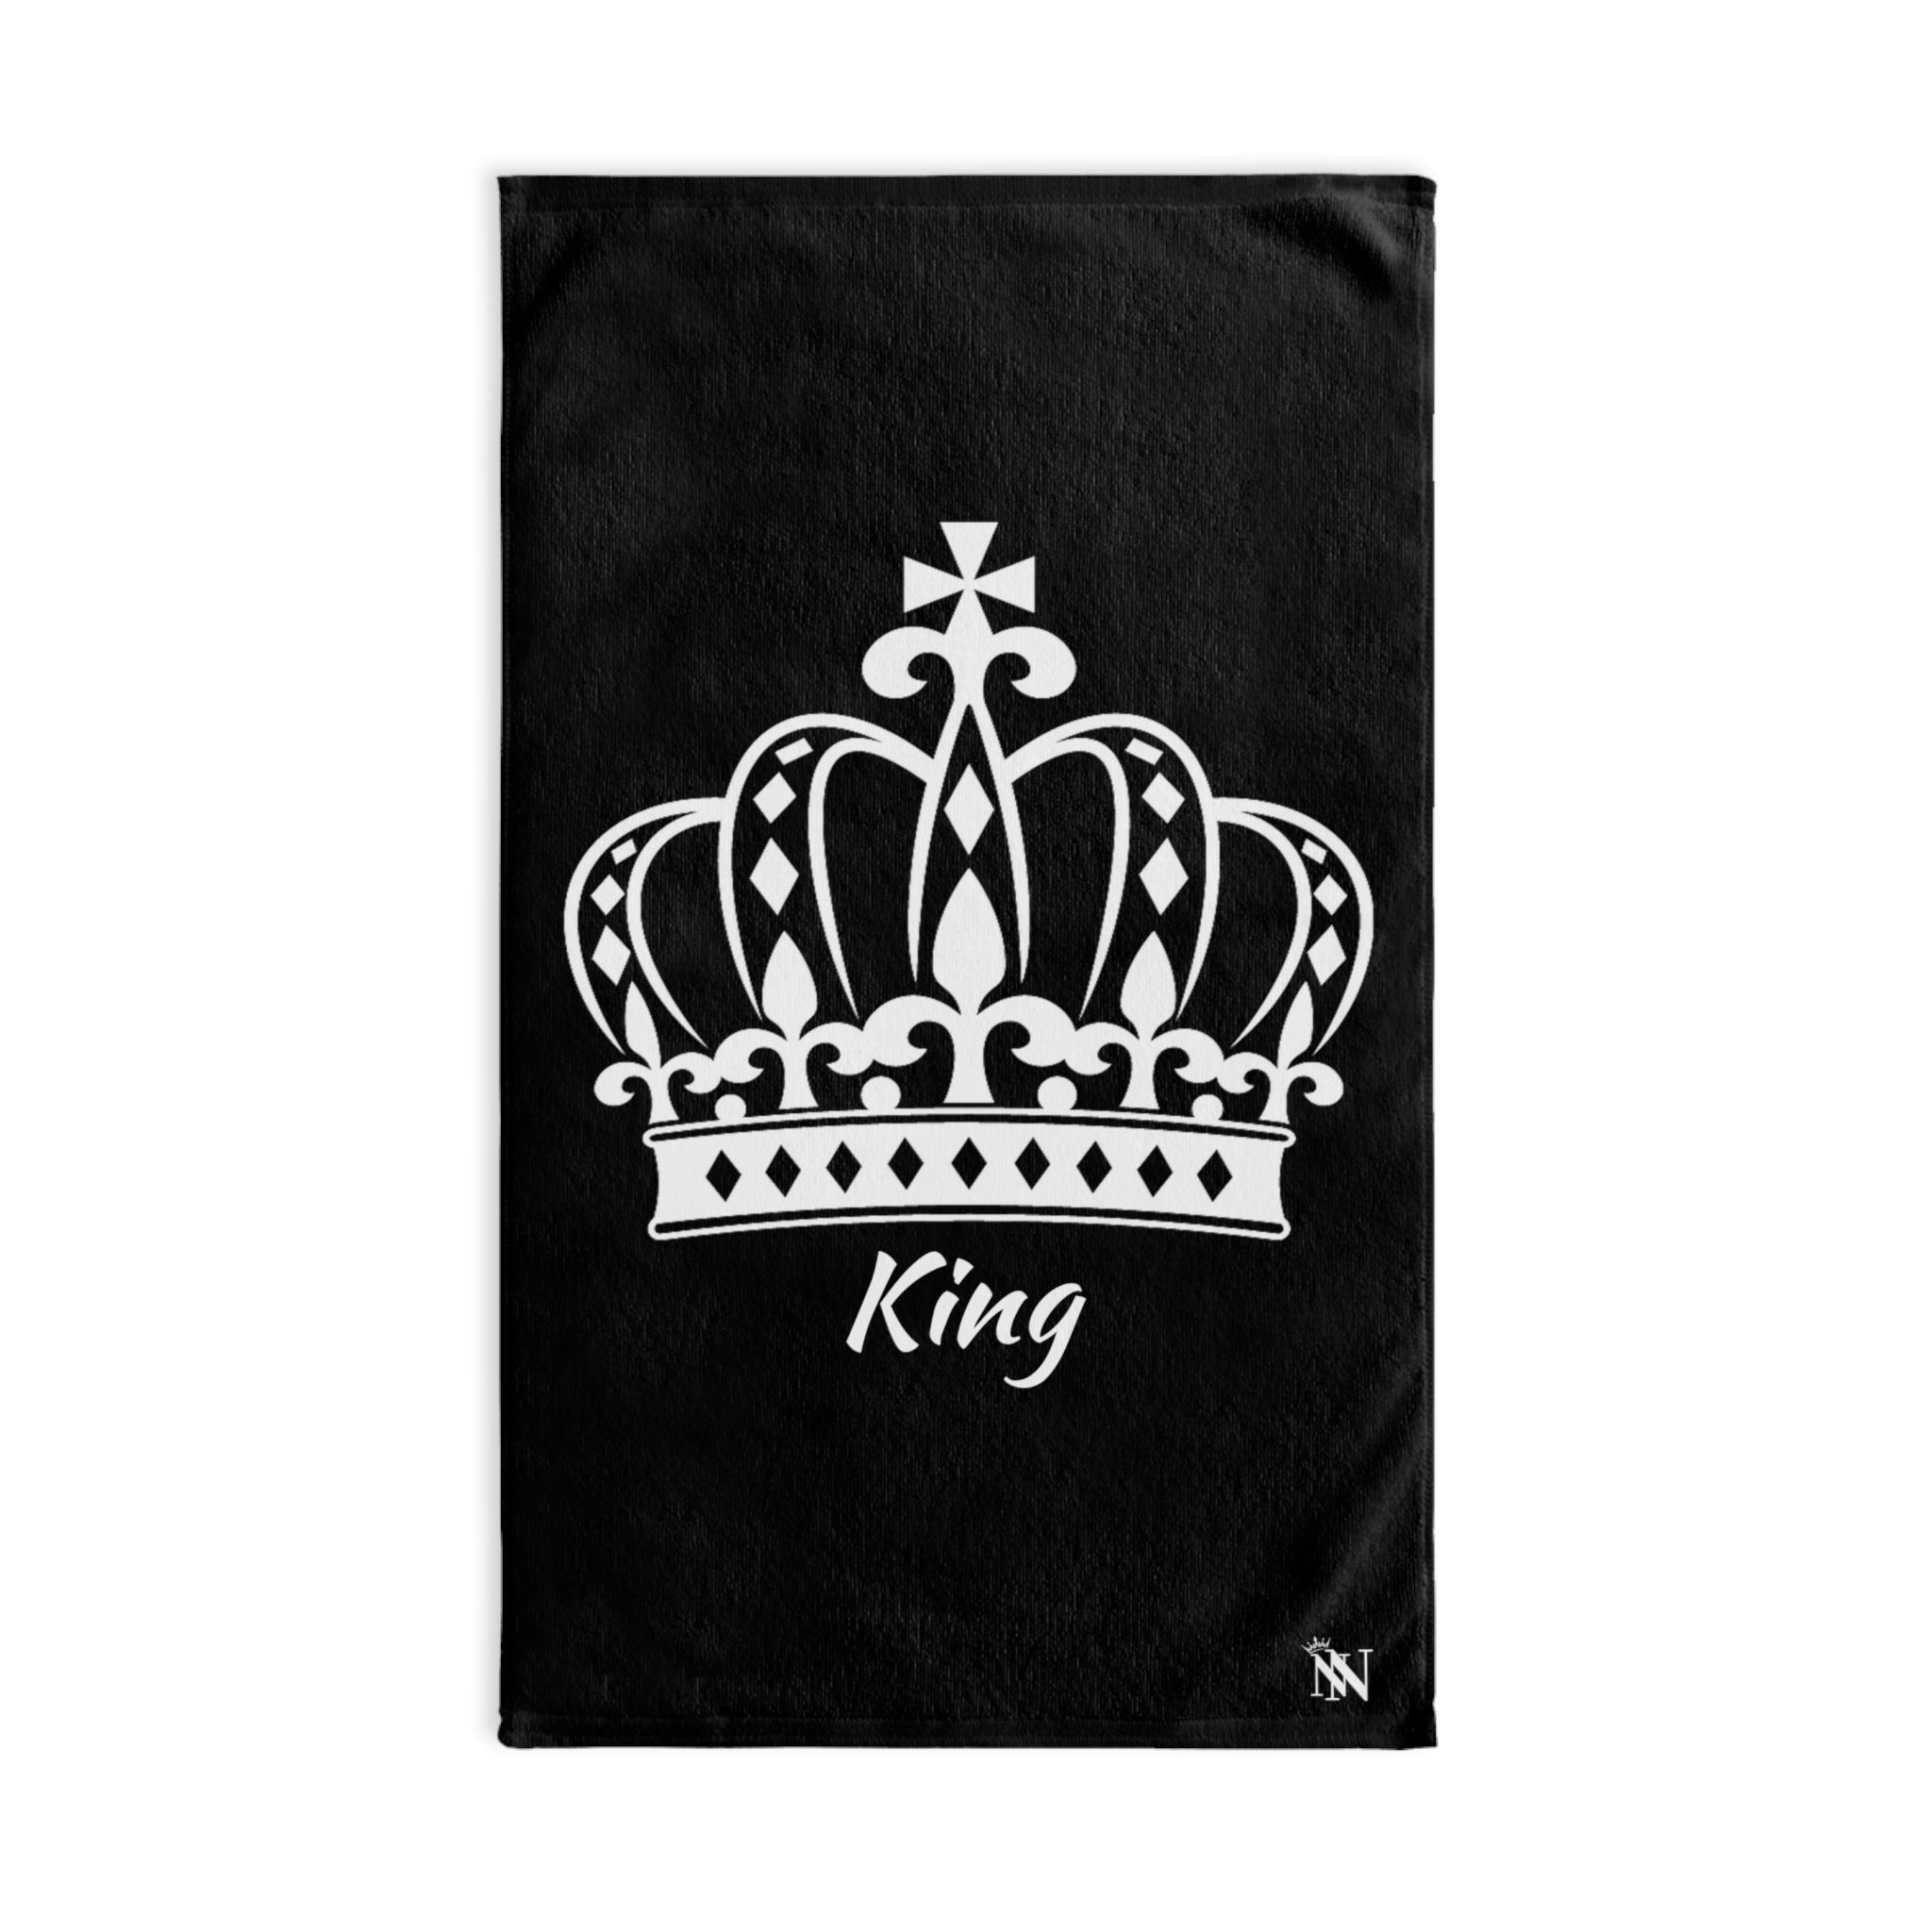 King Crown PrinceBlack | Sexy Gifts for Boyfriend, Funny Towel Romantic Gift for Wedding Couple Fiance First Year 2nd Anniversary Valentines, Party Gag Gifts, Joke Humor Cloth for Husband Men BF NECTAR NAPKINS